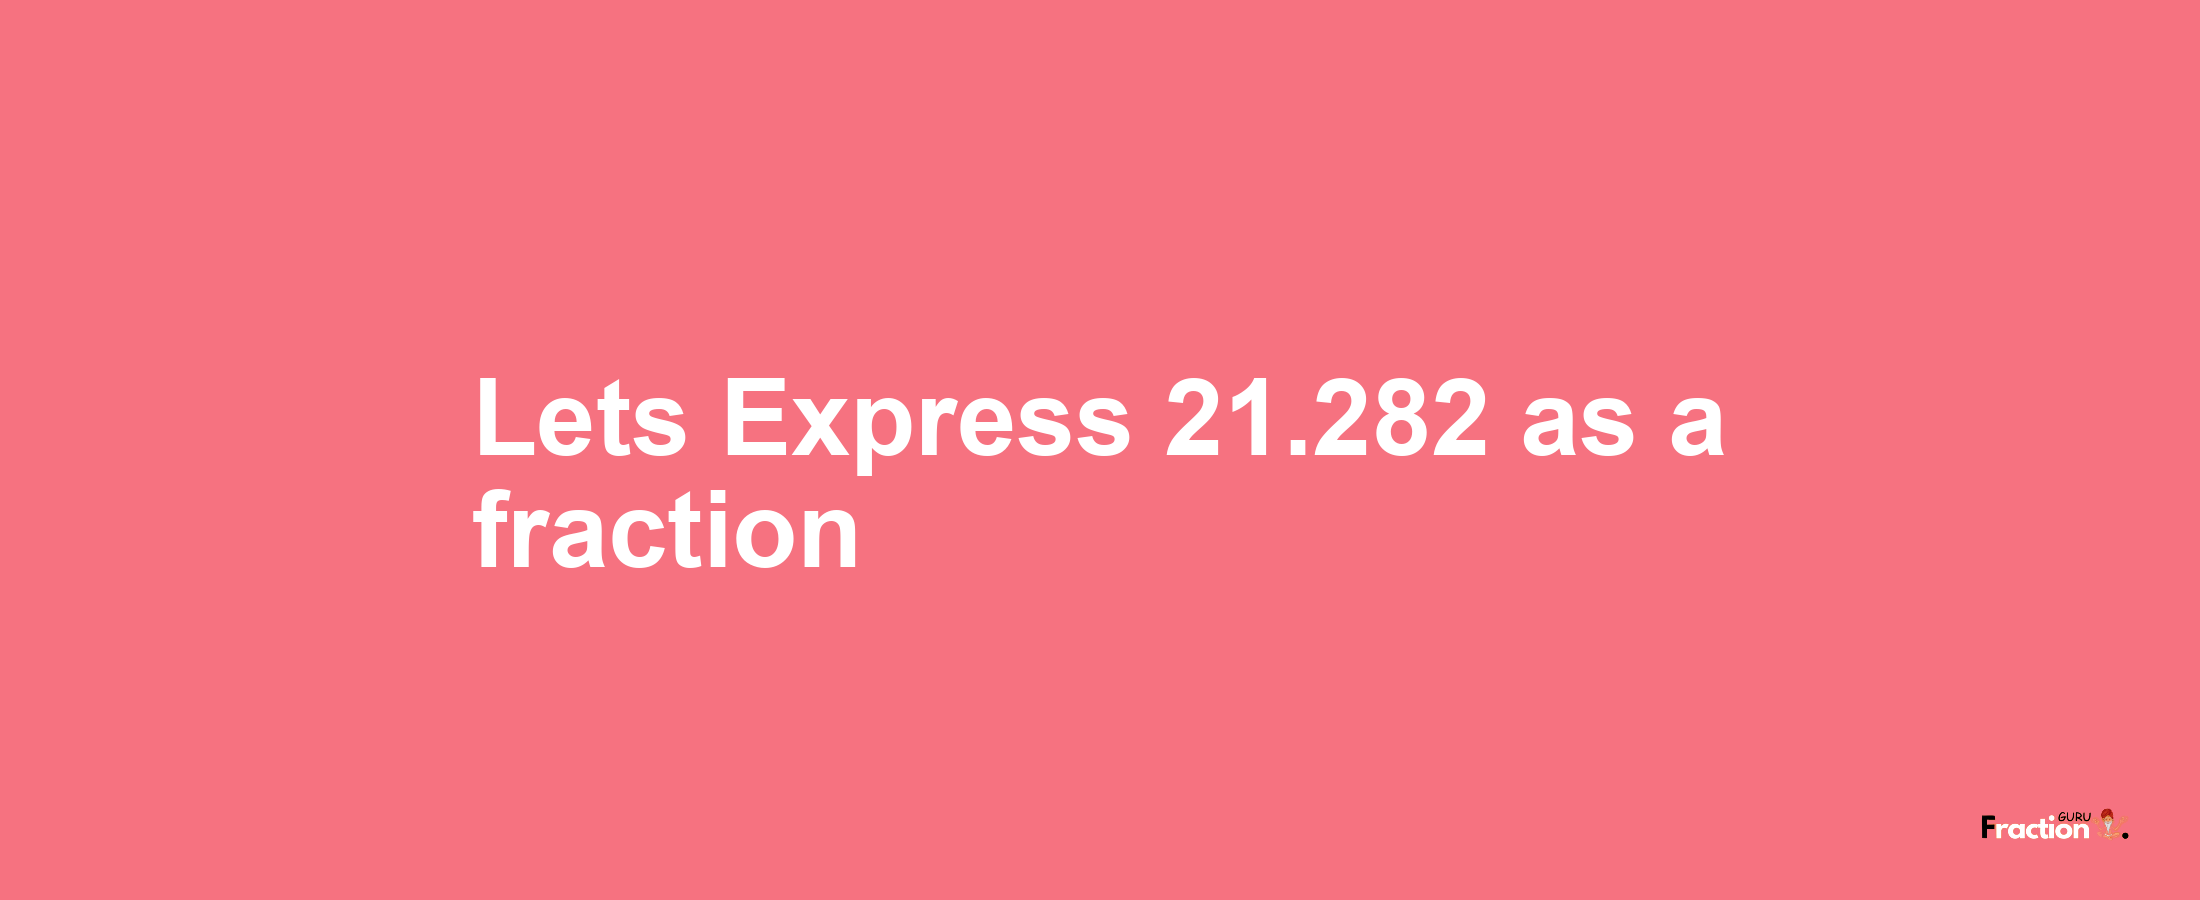 Lets Express 21.282 as afraction